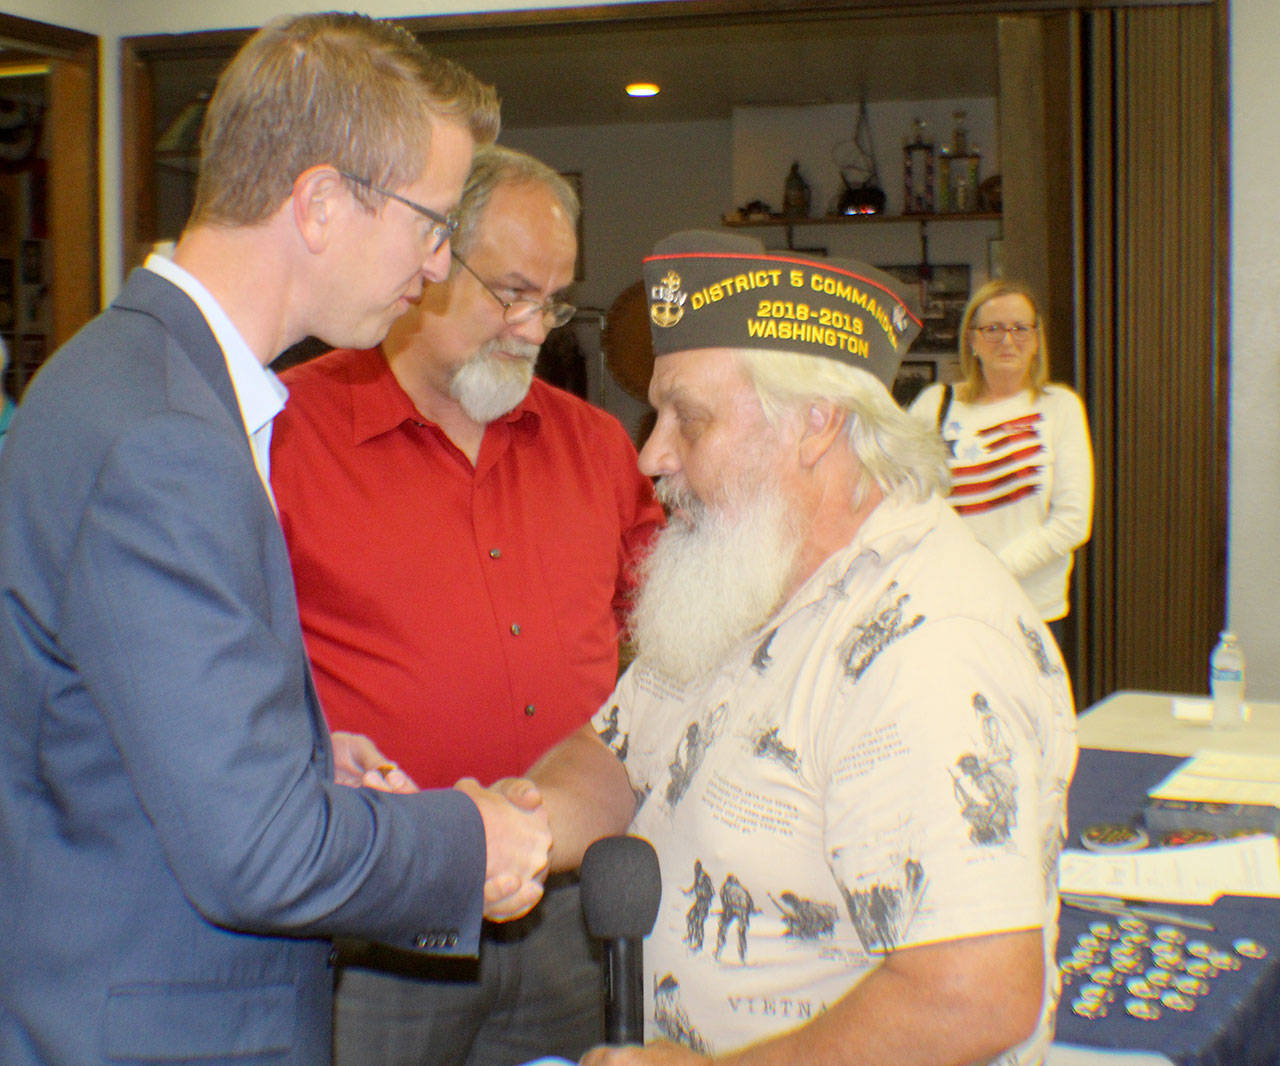 Bill Wickwire, right, shakes hands with Rep. Derek Kilmer during a ceremony to honor Vietnam vets Wednesday, Aug. 22, 2018, in Elma. Wickwire is the Veterans of Foreign Wars District 5 commander. He is with the Elma Post 1948. Photo by Michael Lang, The Vidette